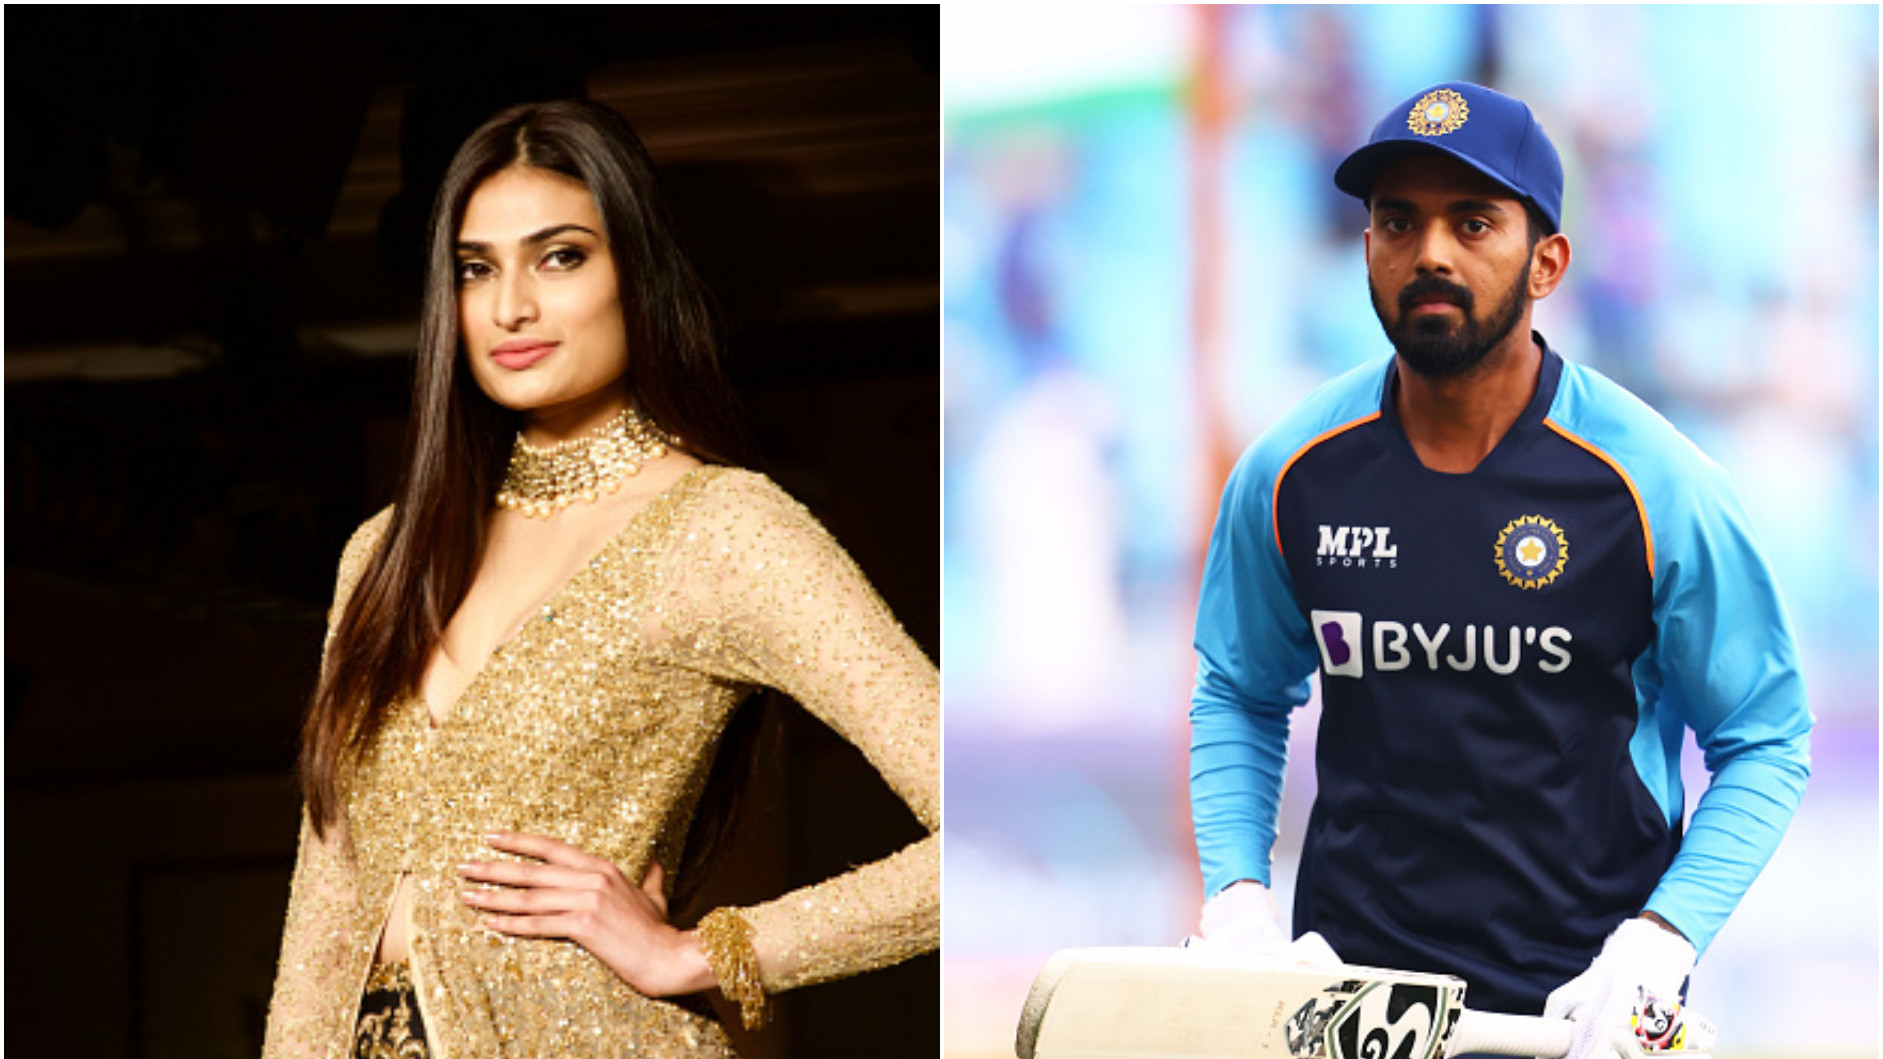 KL Rahul to tie the marriage knot with Athiya Shetty next year: Report